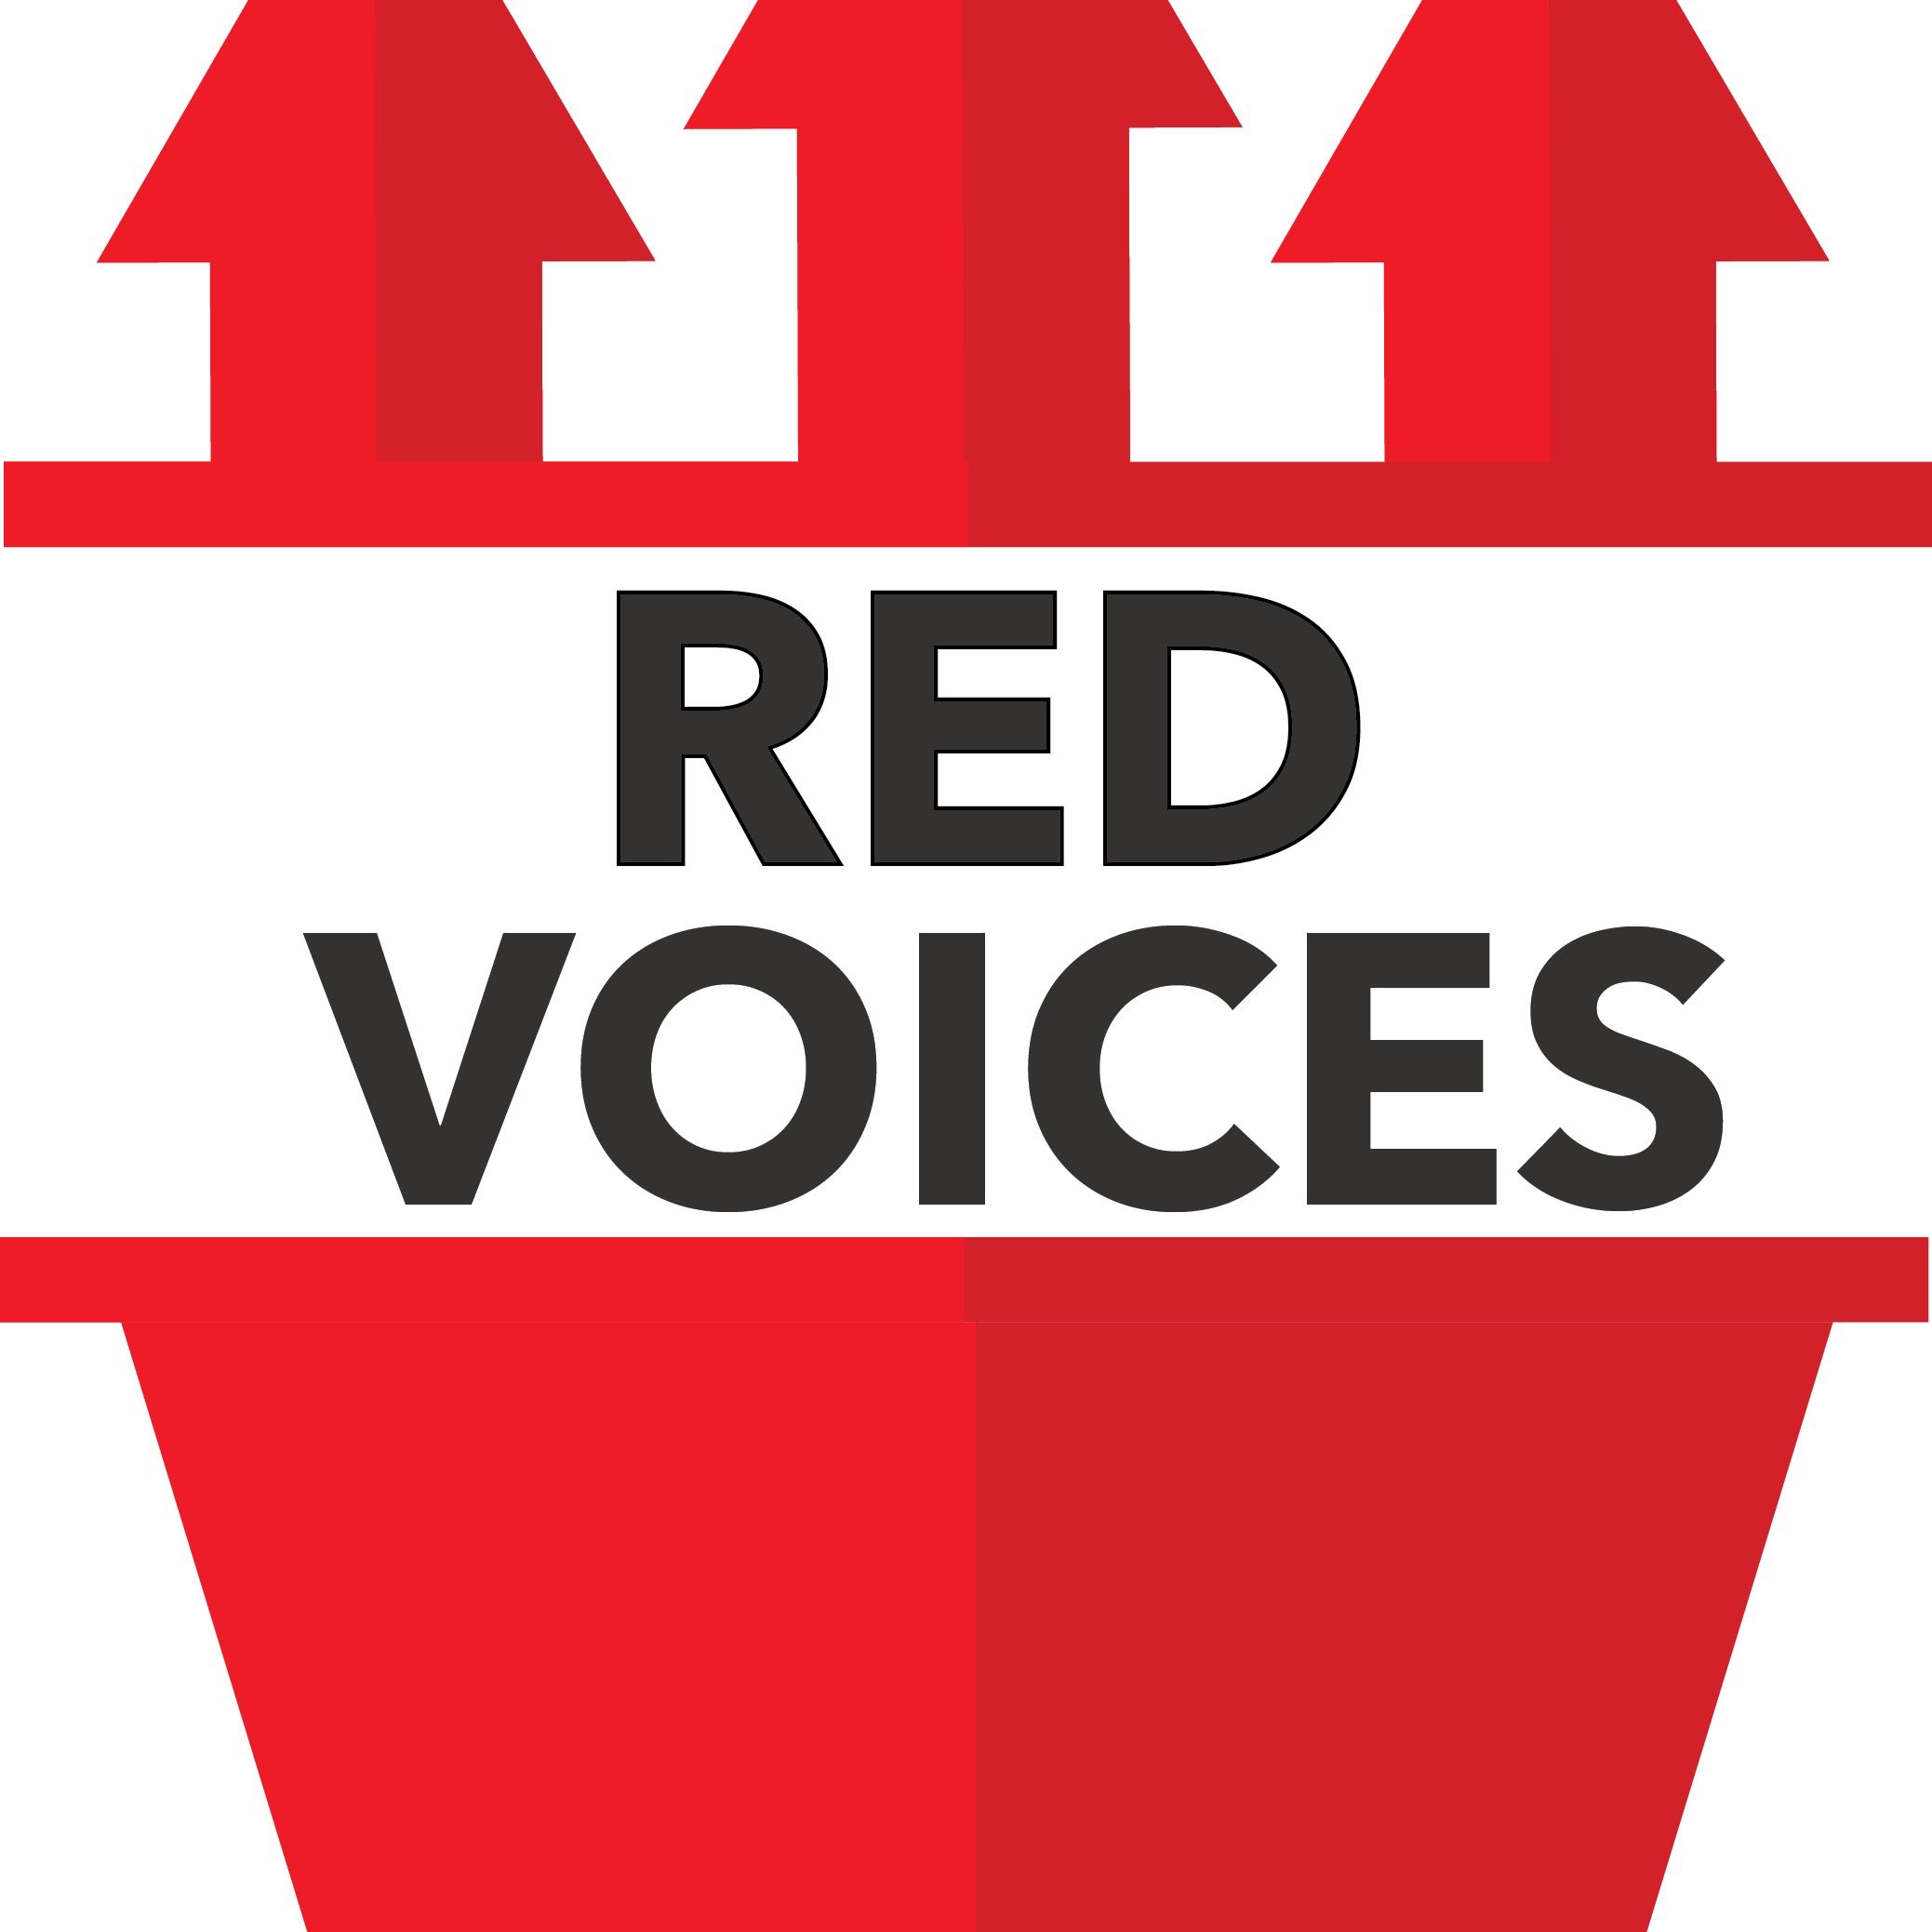 Red voice. Voice Red. Y-Red - Voices.